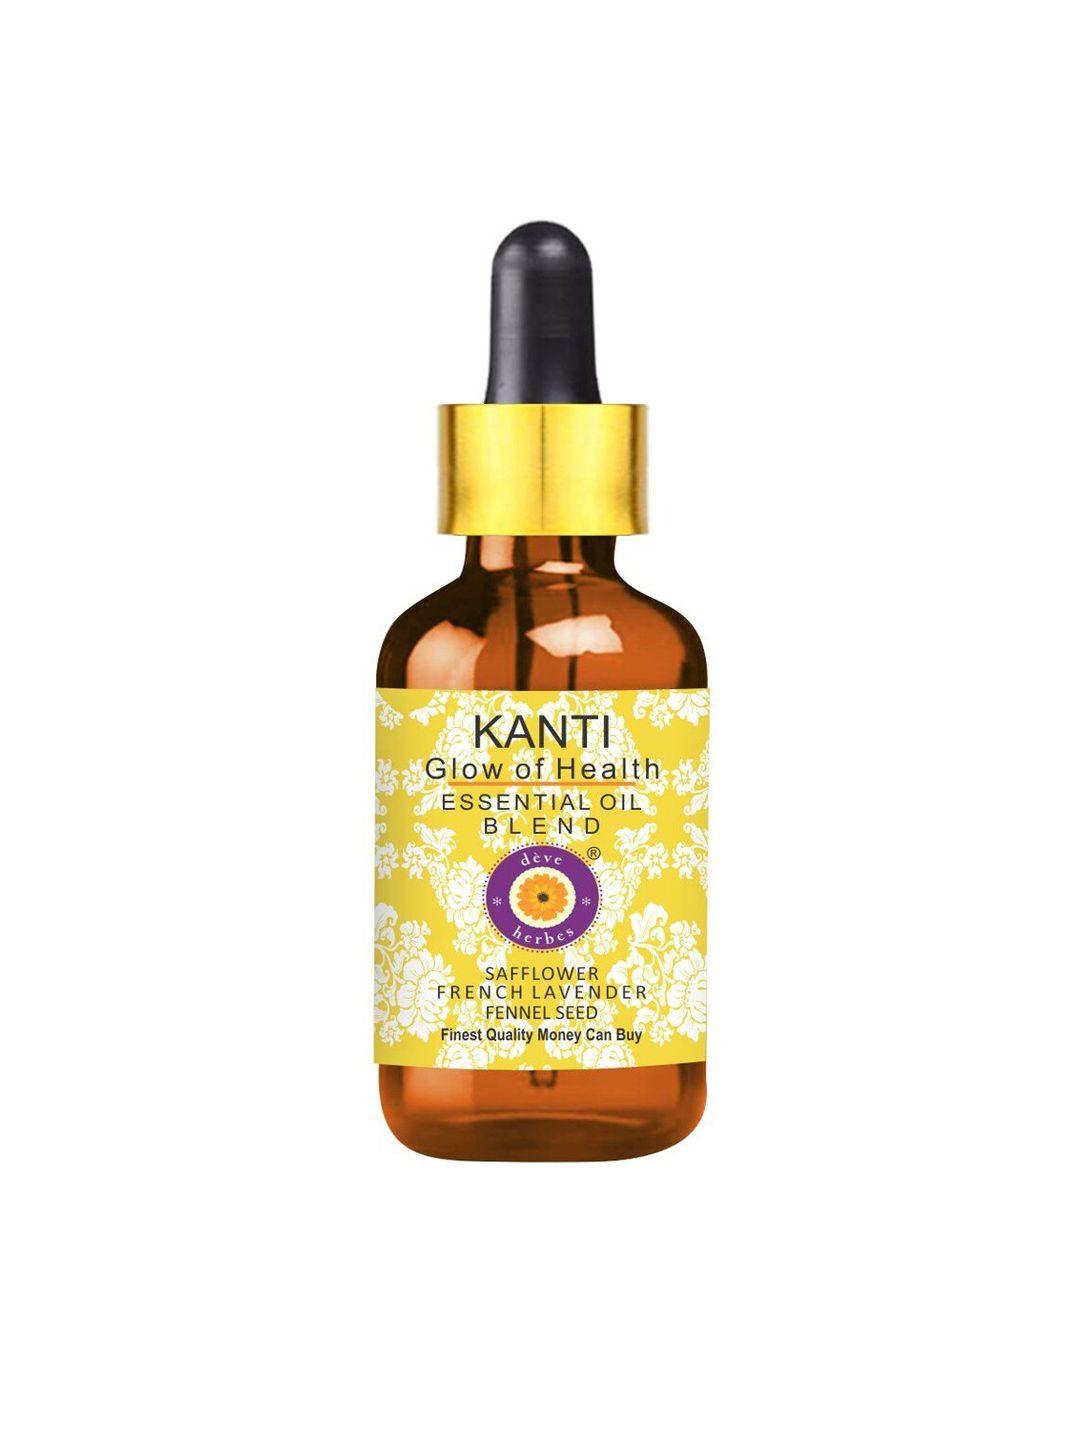 deve herbes kanti glow of health complete nourishment face oil with glass dropper - 10ml